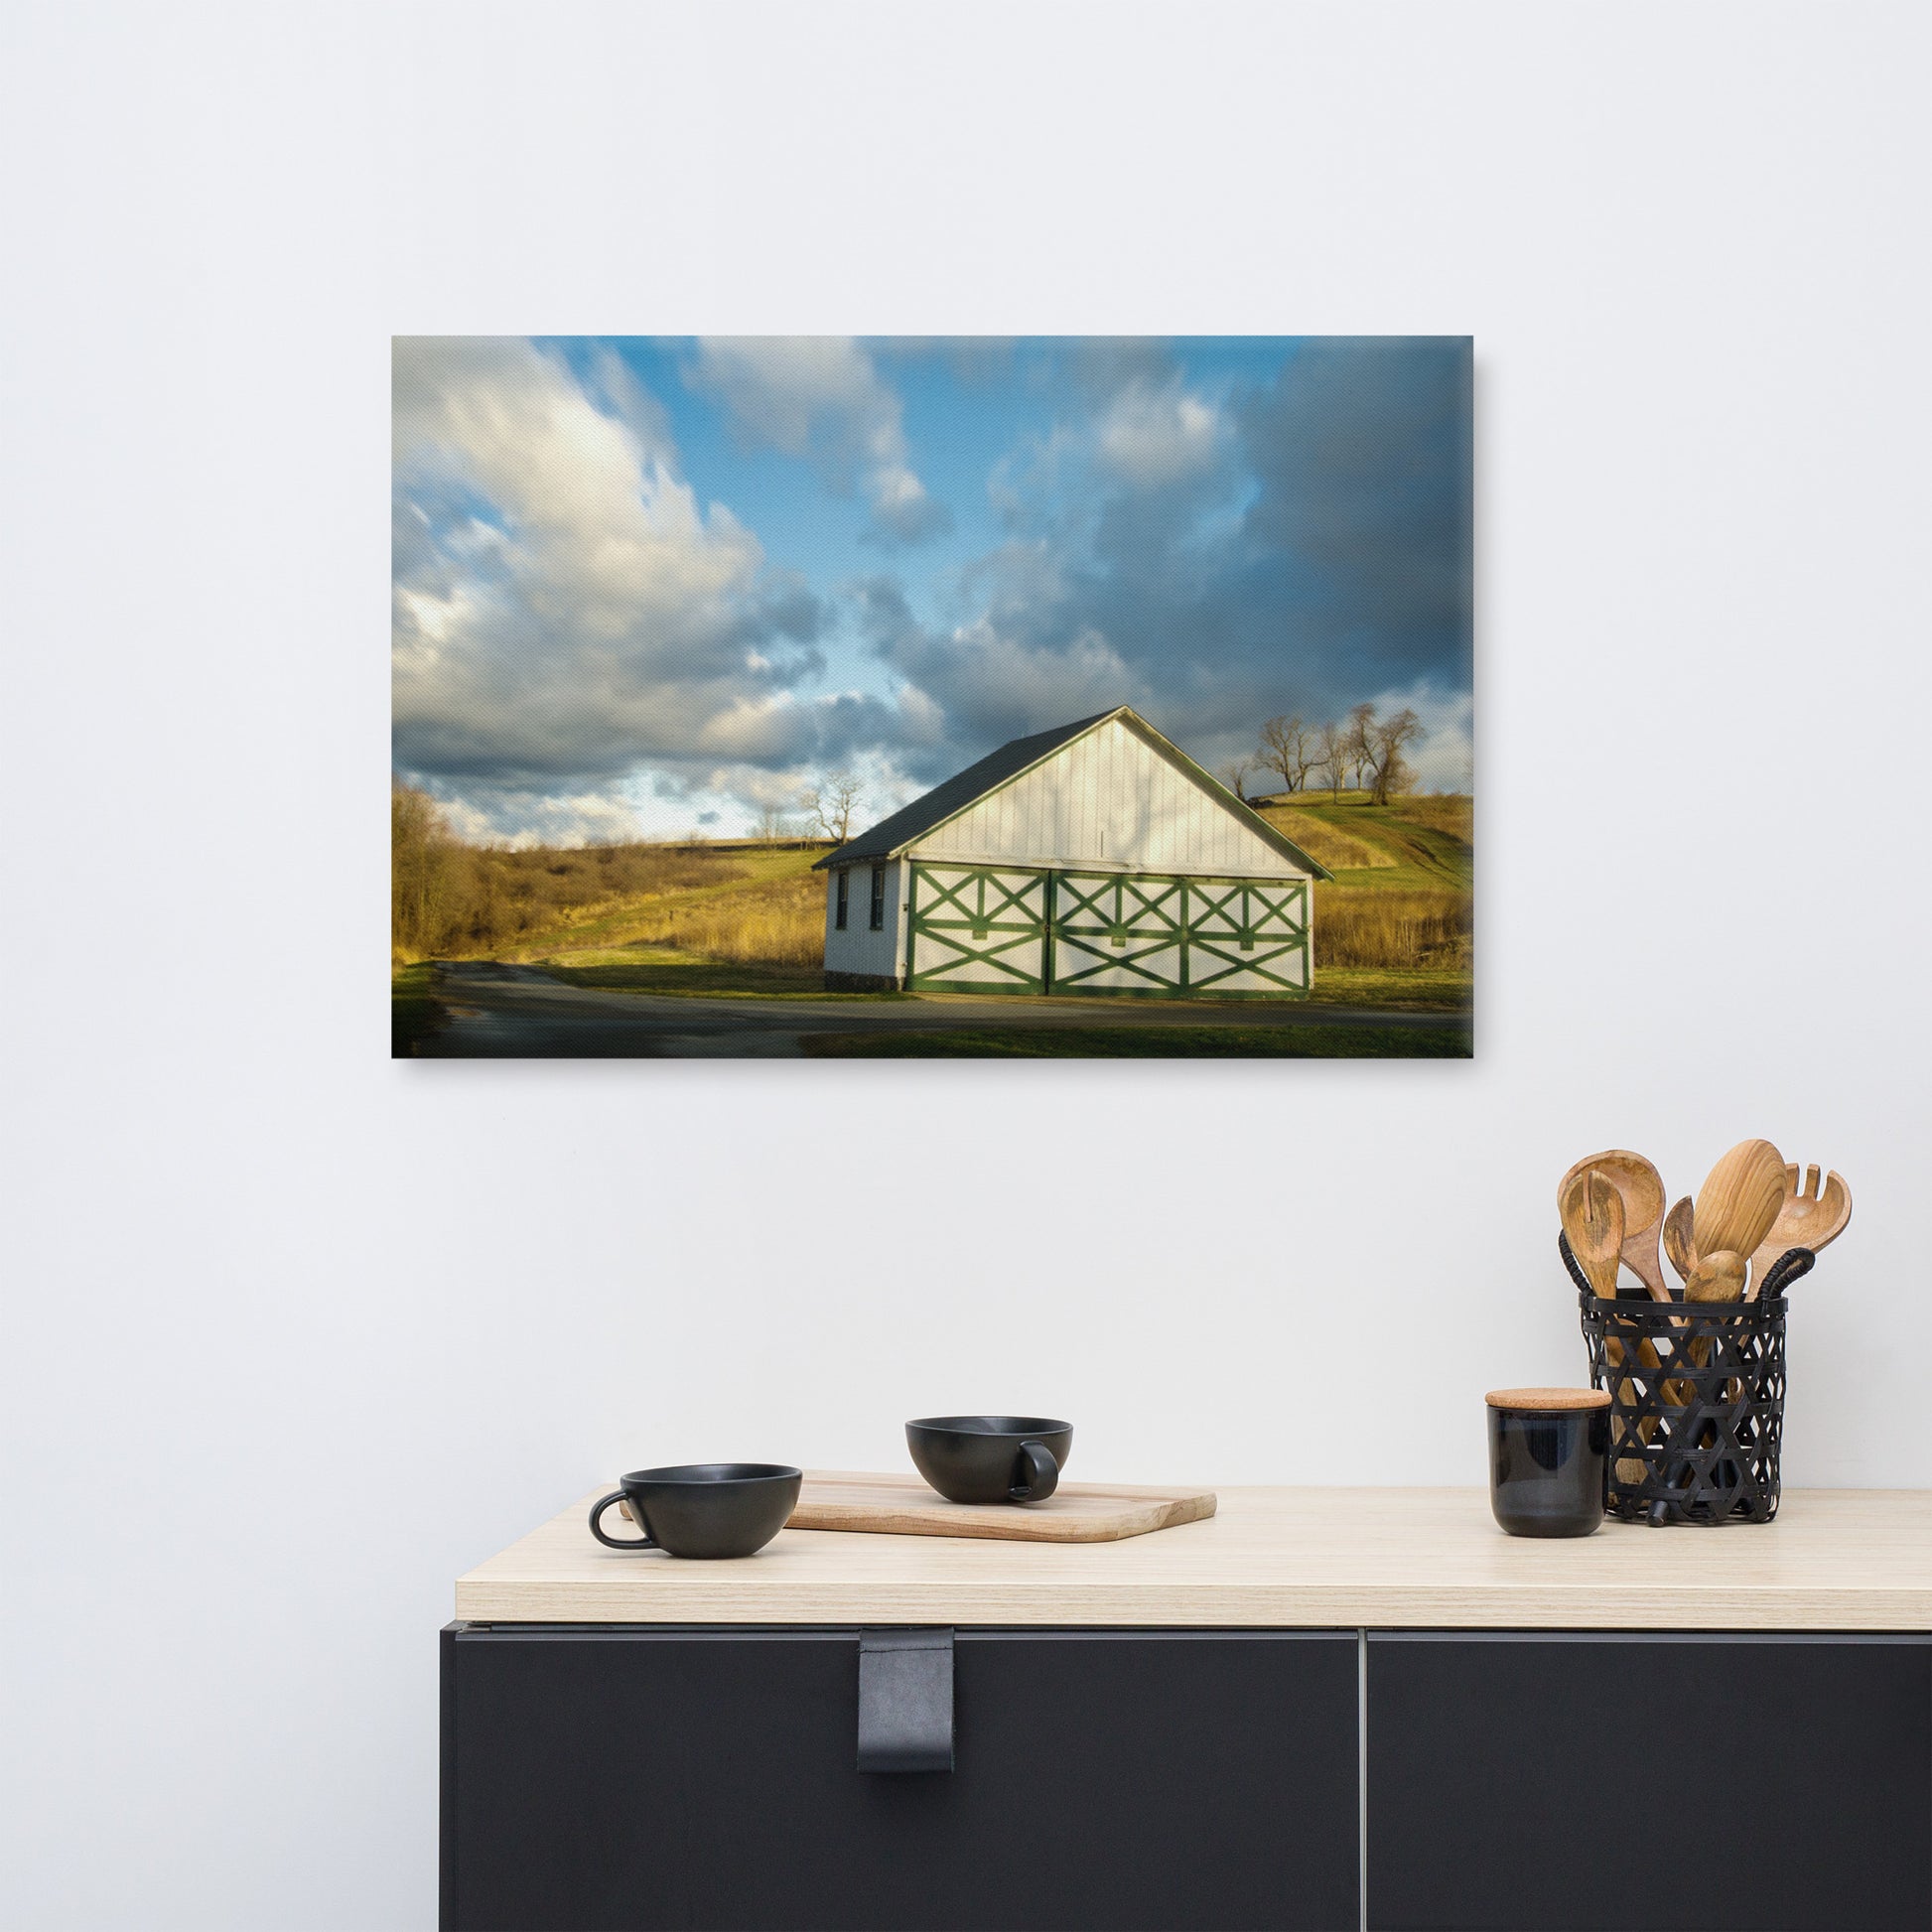 Dining Wall Art: Aging Barn in the Morning Sun Traditional Color - Rural / Country Style Landscape / Nature Photograph Canvas Wall Art Print - Artwork - Wall Decor